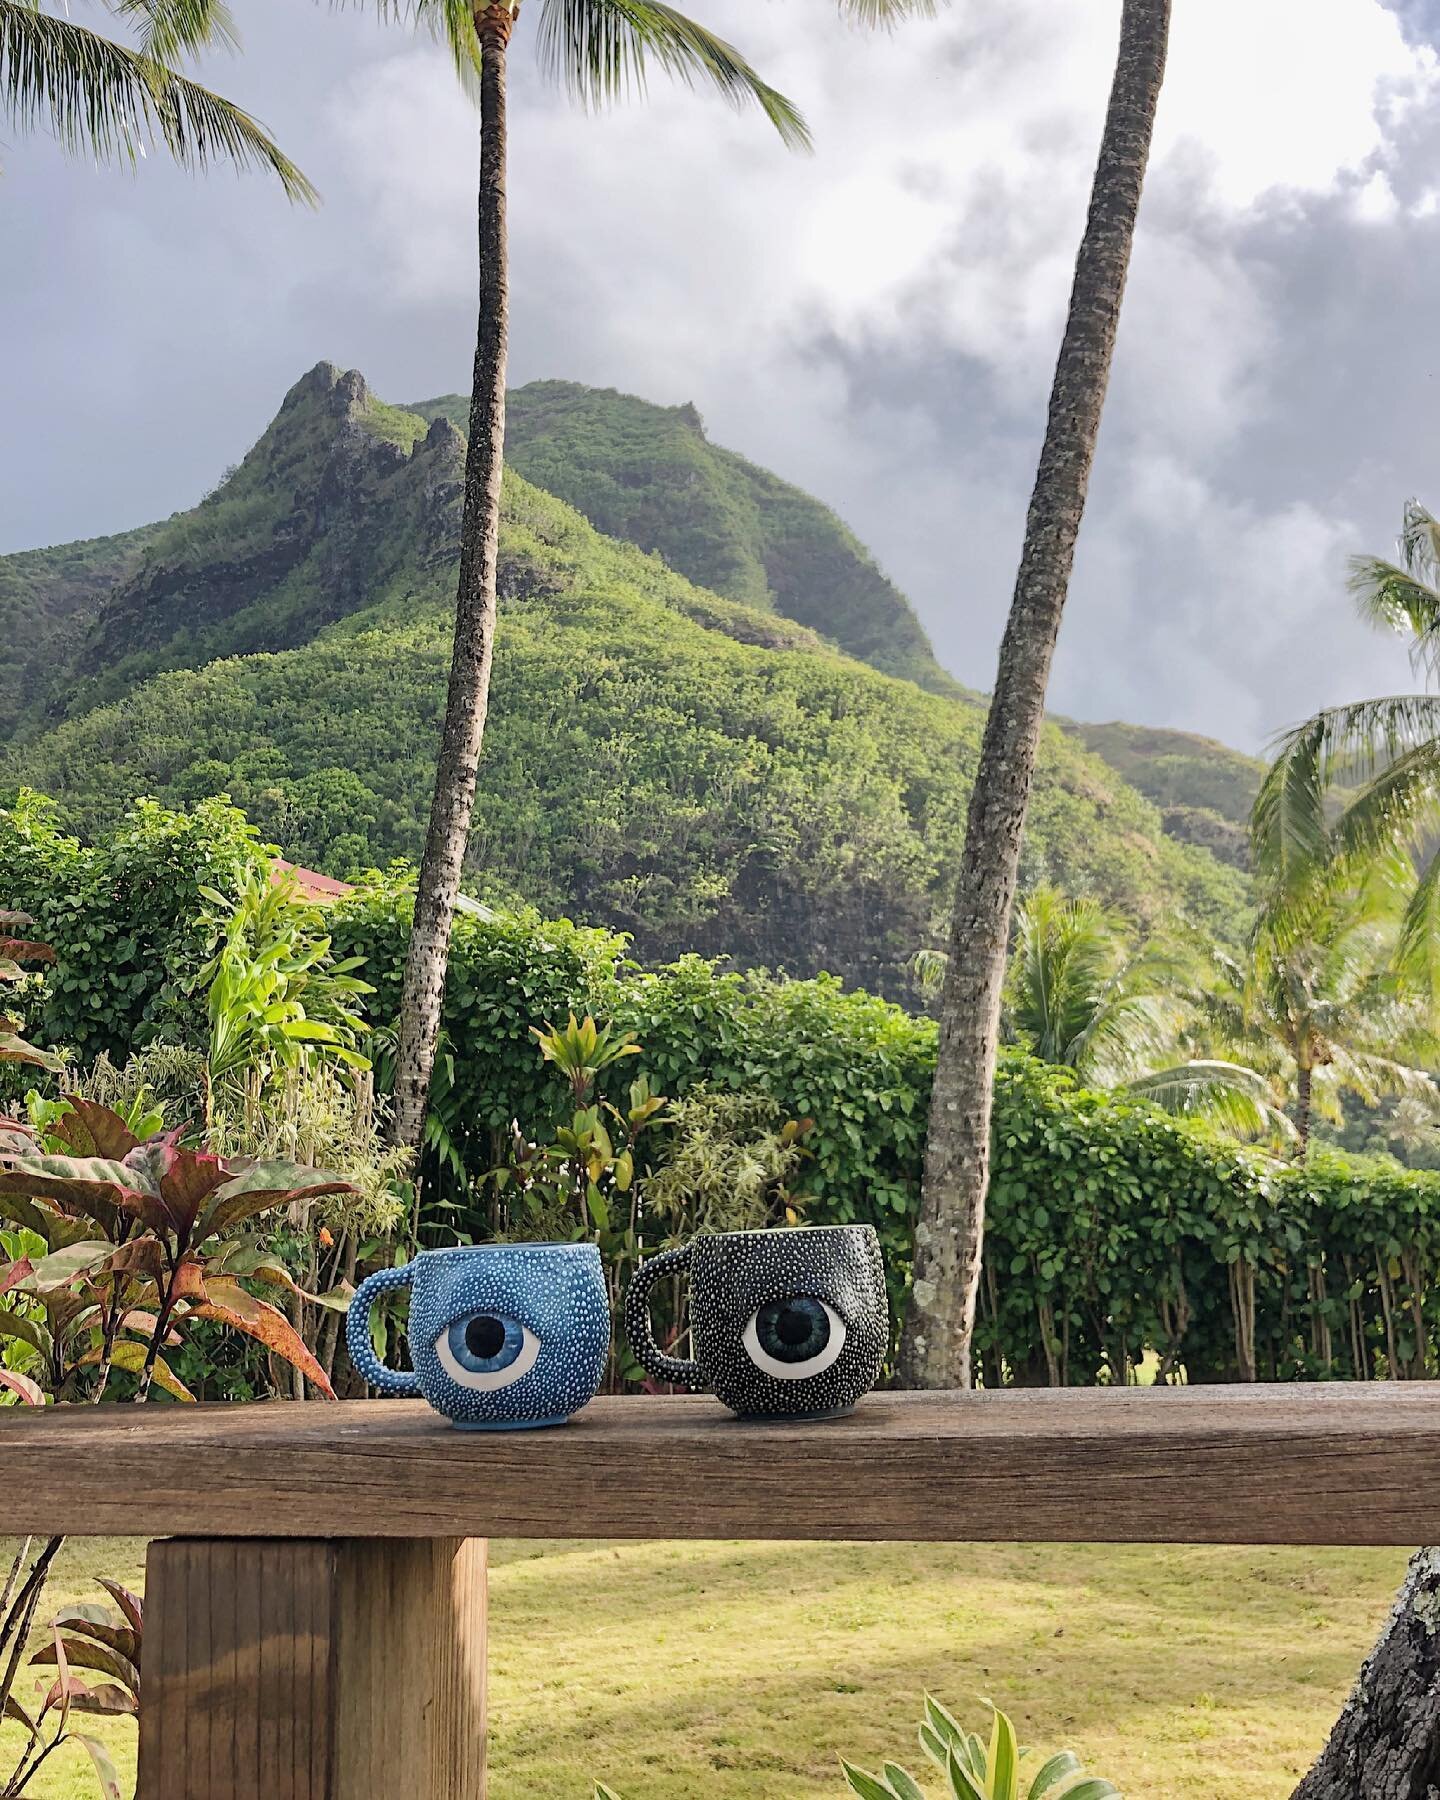 Just received these beautiful update pics of this lil pair in their new home in Hawaii! Clearly they are living their best lives with the very talented @blobdylan 💕 

Feeling just a little envious of their location right now